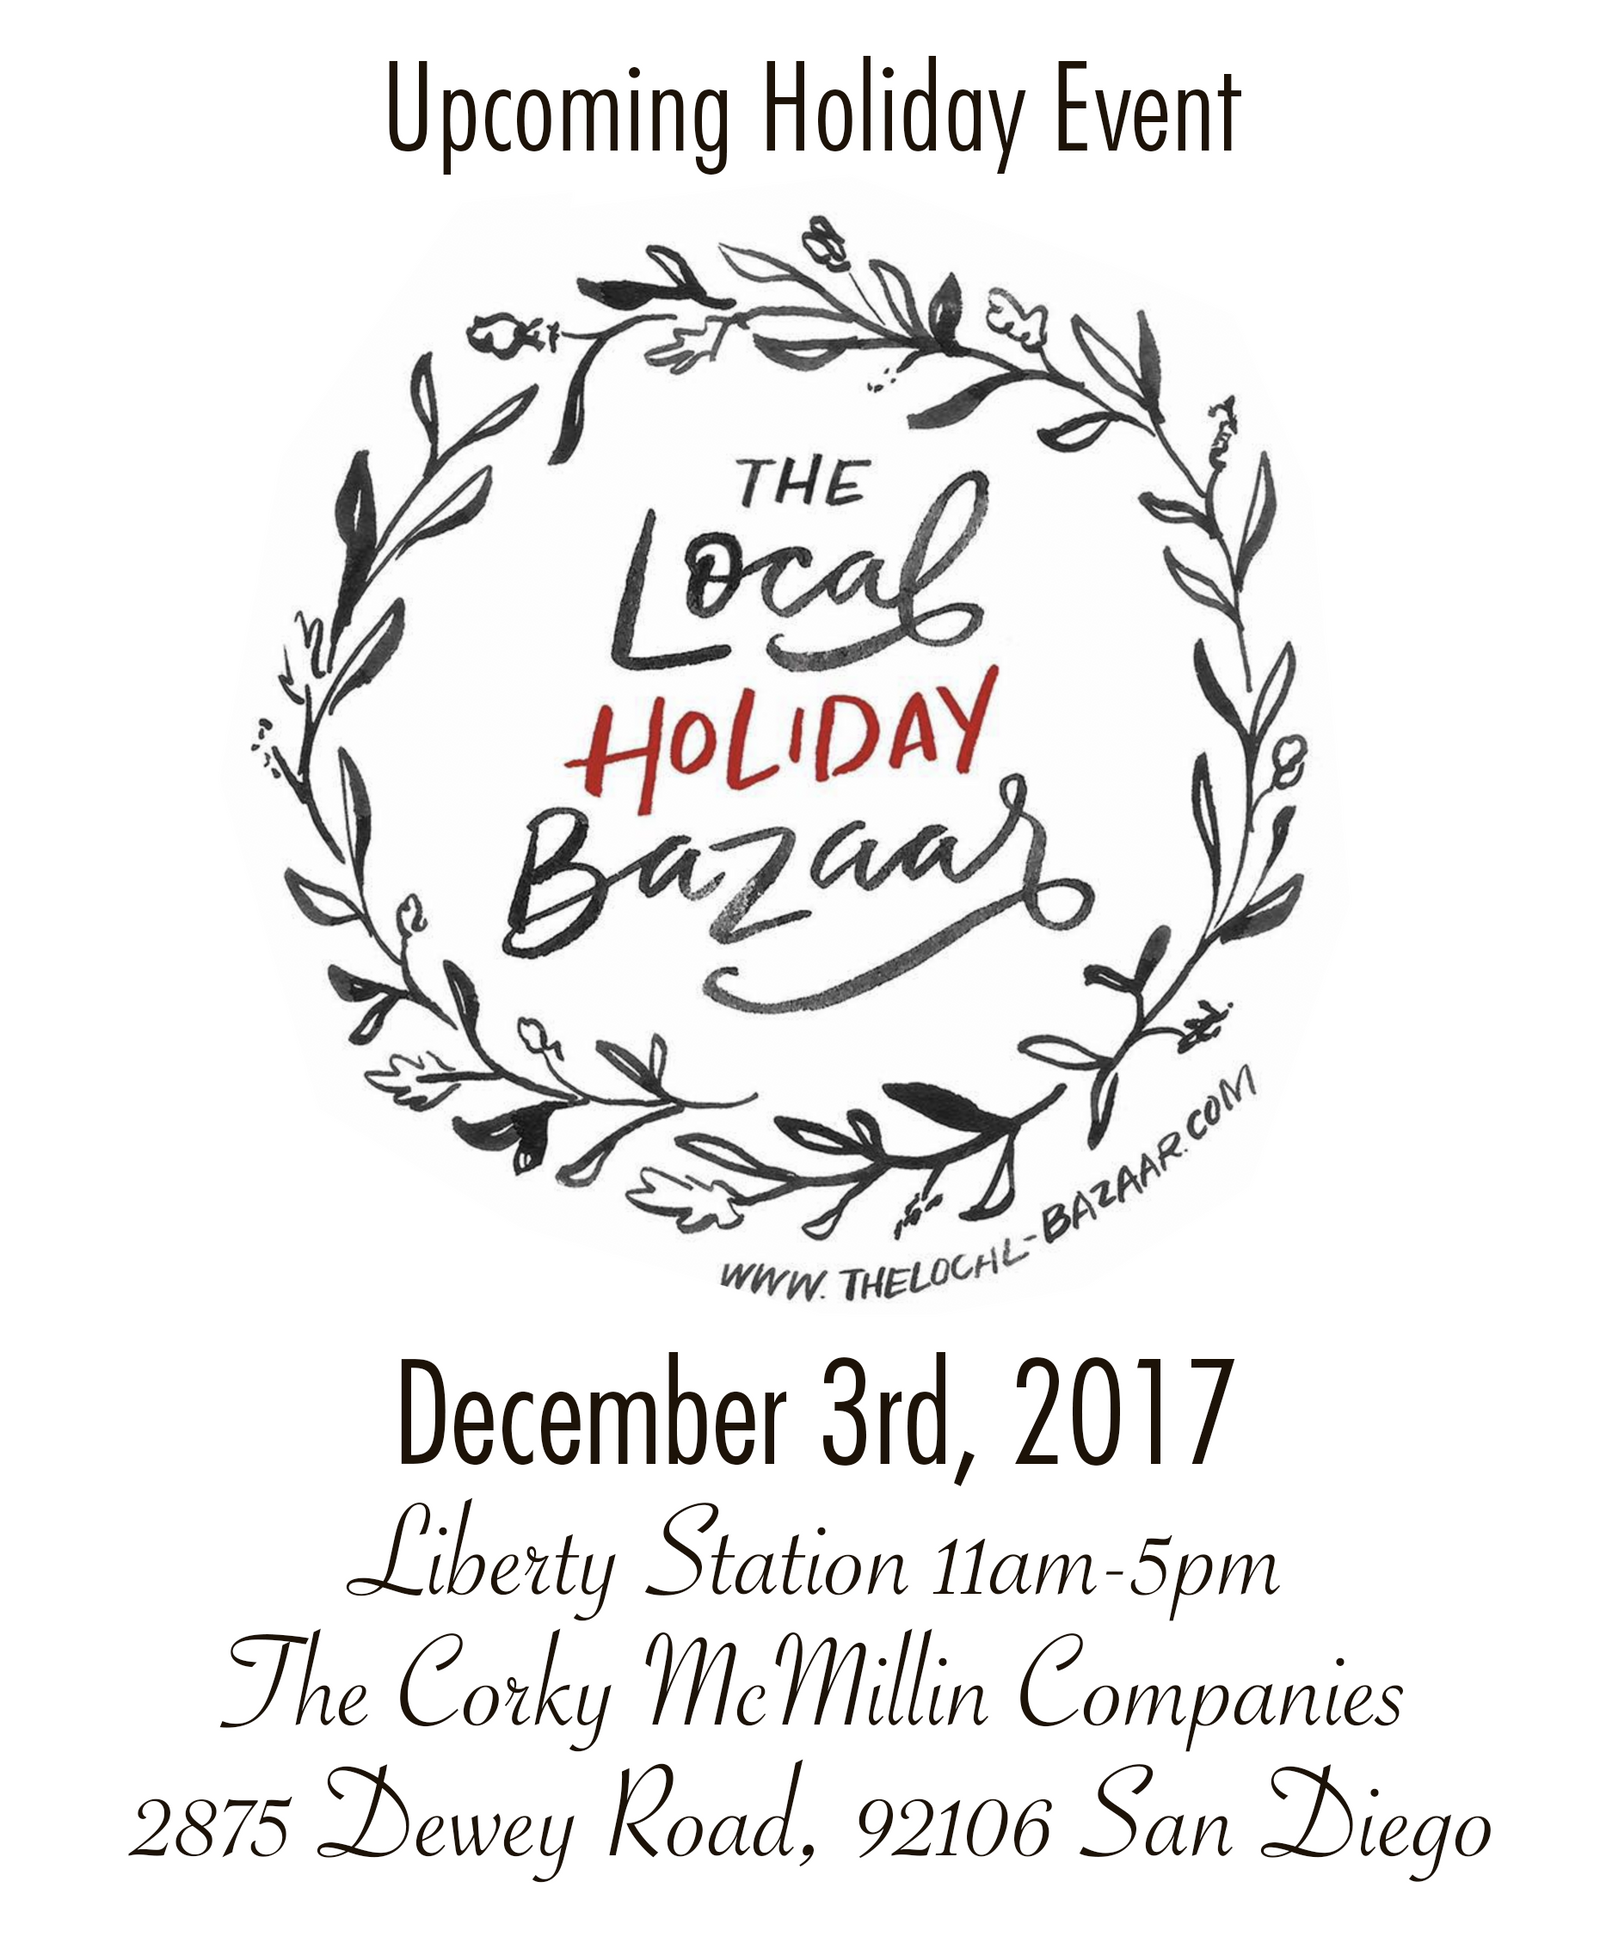 UPCOMING EVENT The Local Holiday Bazaar - The Oblong Box Shop